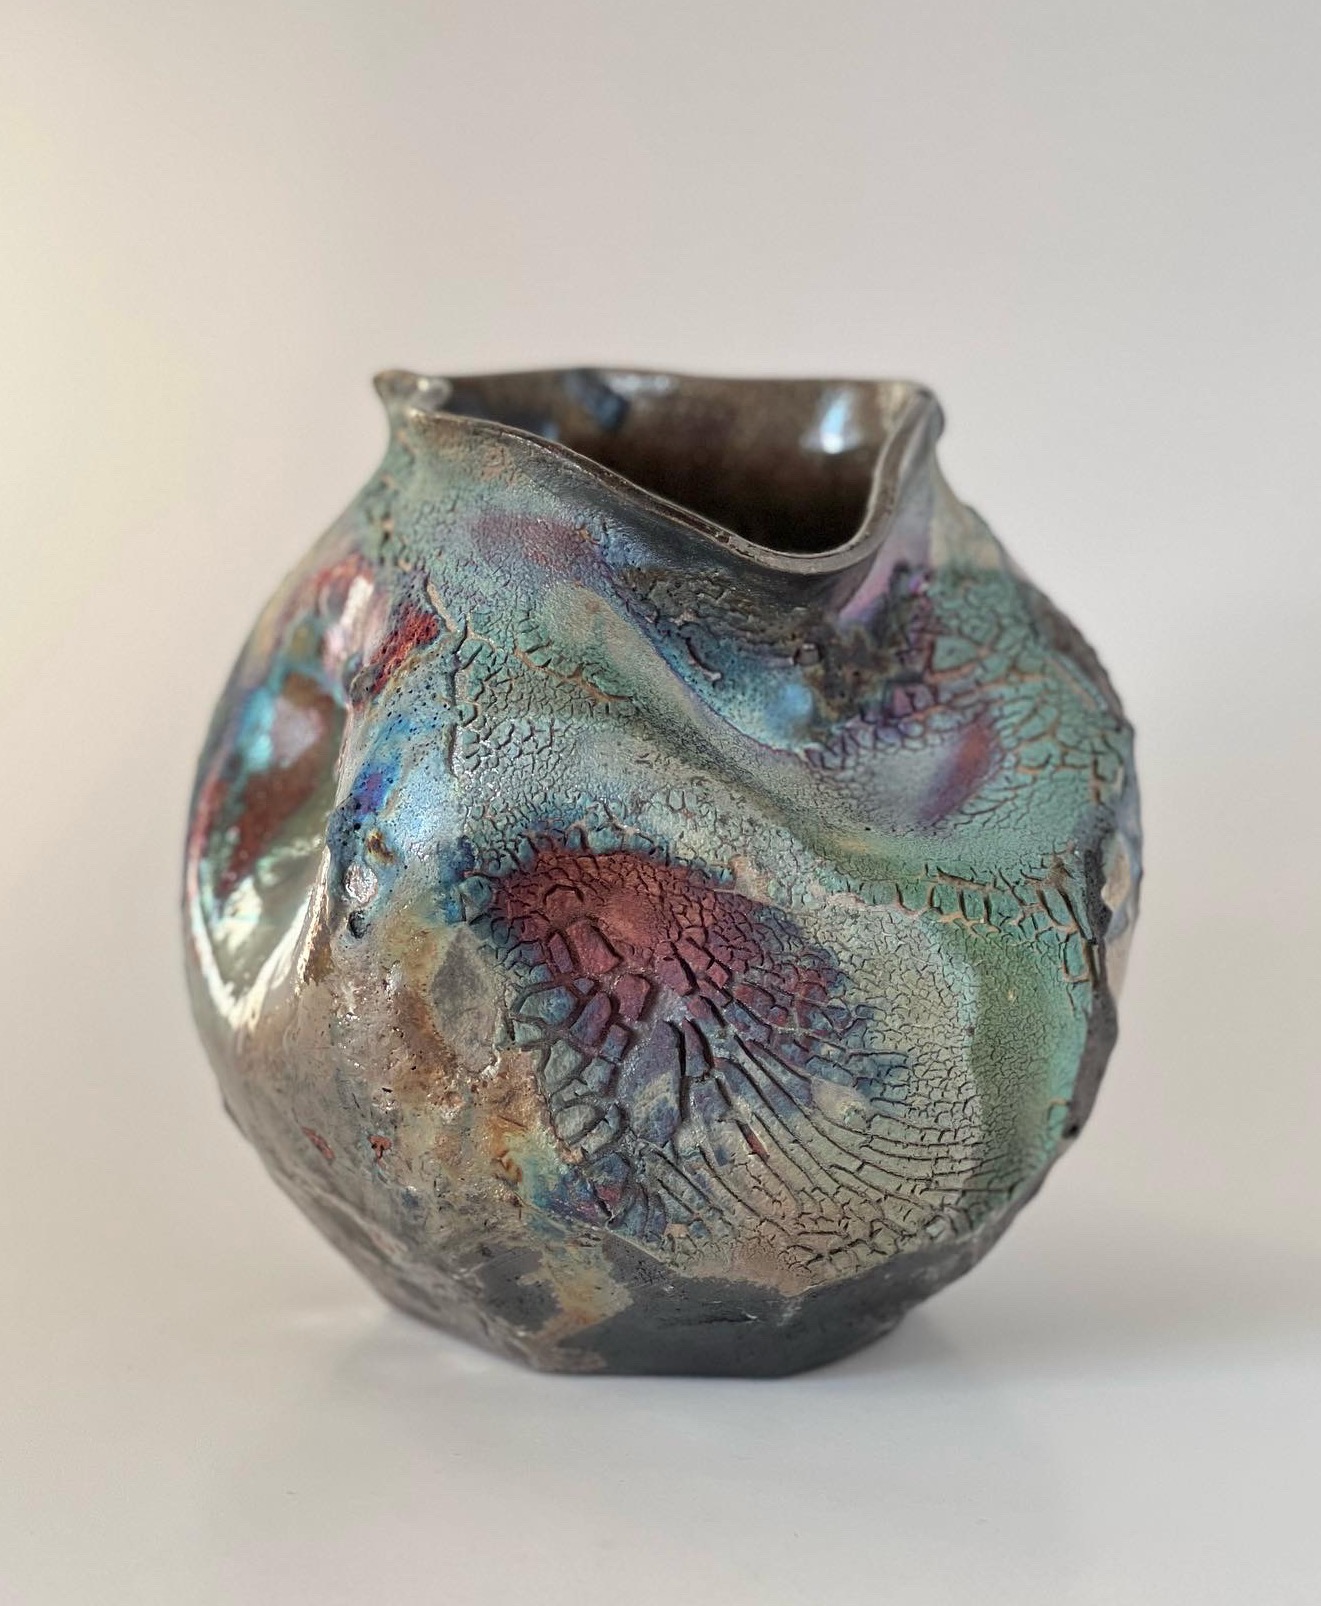 Krystal Yavicoli, "Crater," 2022. Stoneware and glaze. 5 3/4 in. high x 5 3/4 in. long x 5 1/2 in. deep